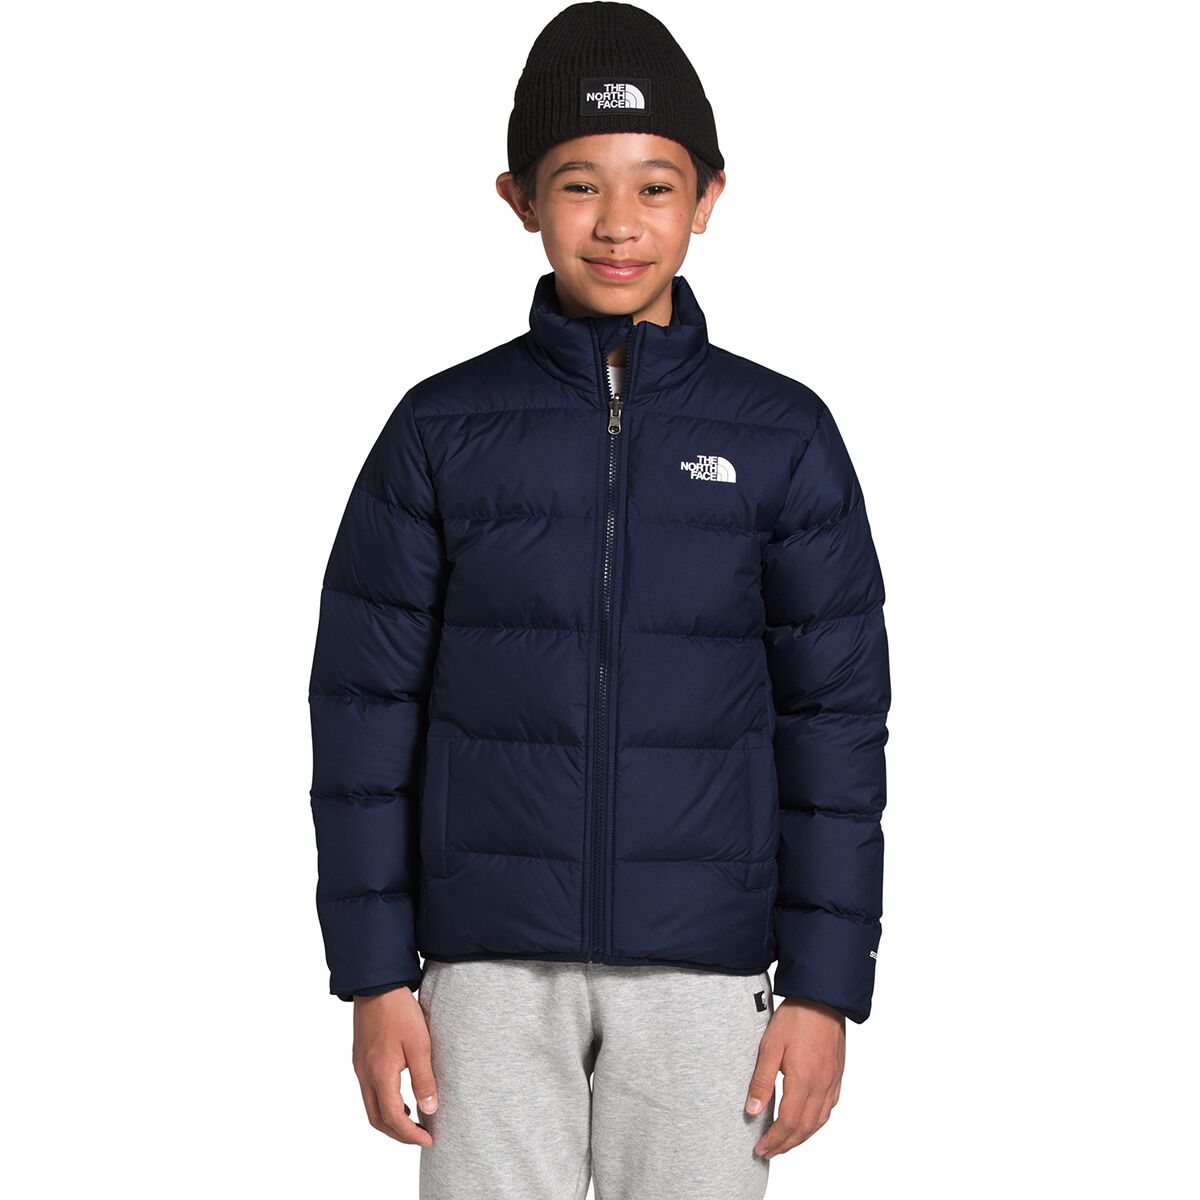 The North Face Reversible Andes Jacket 